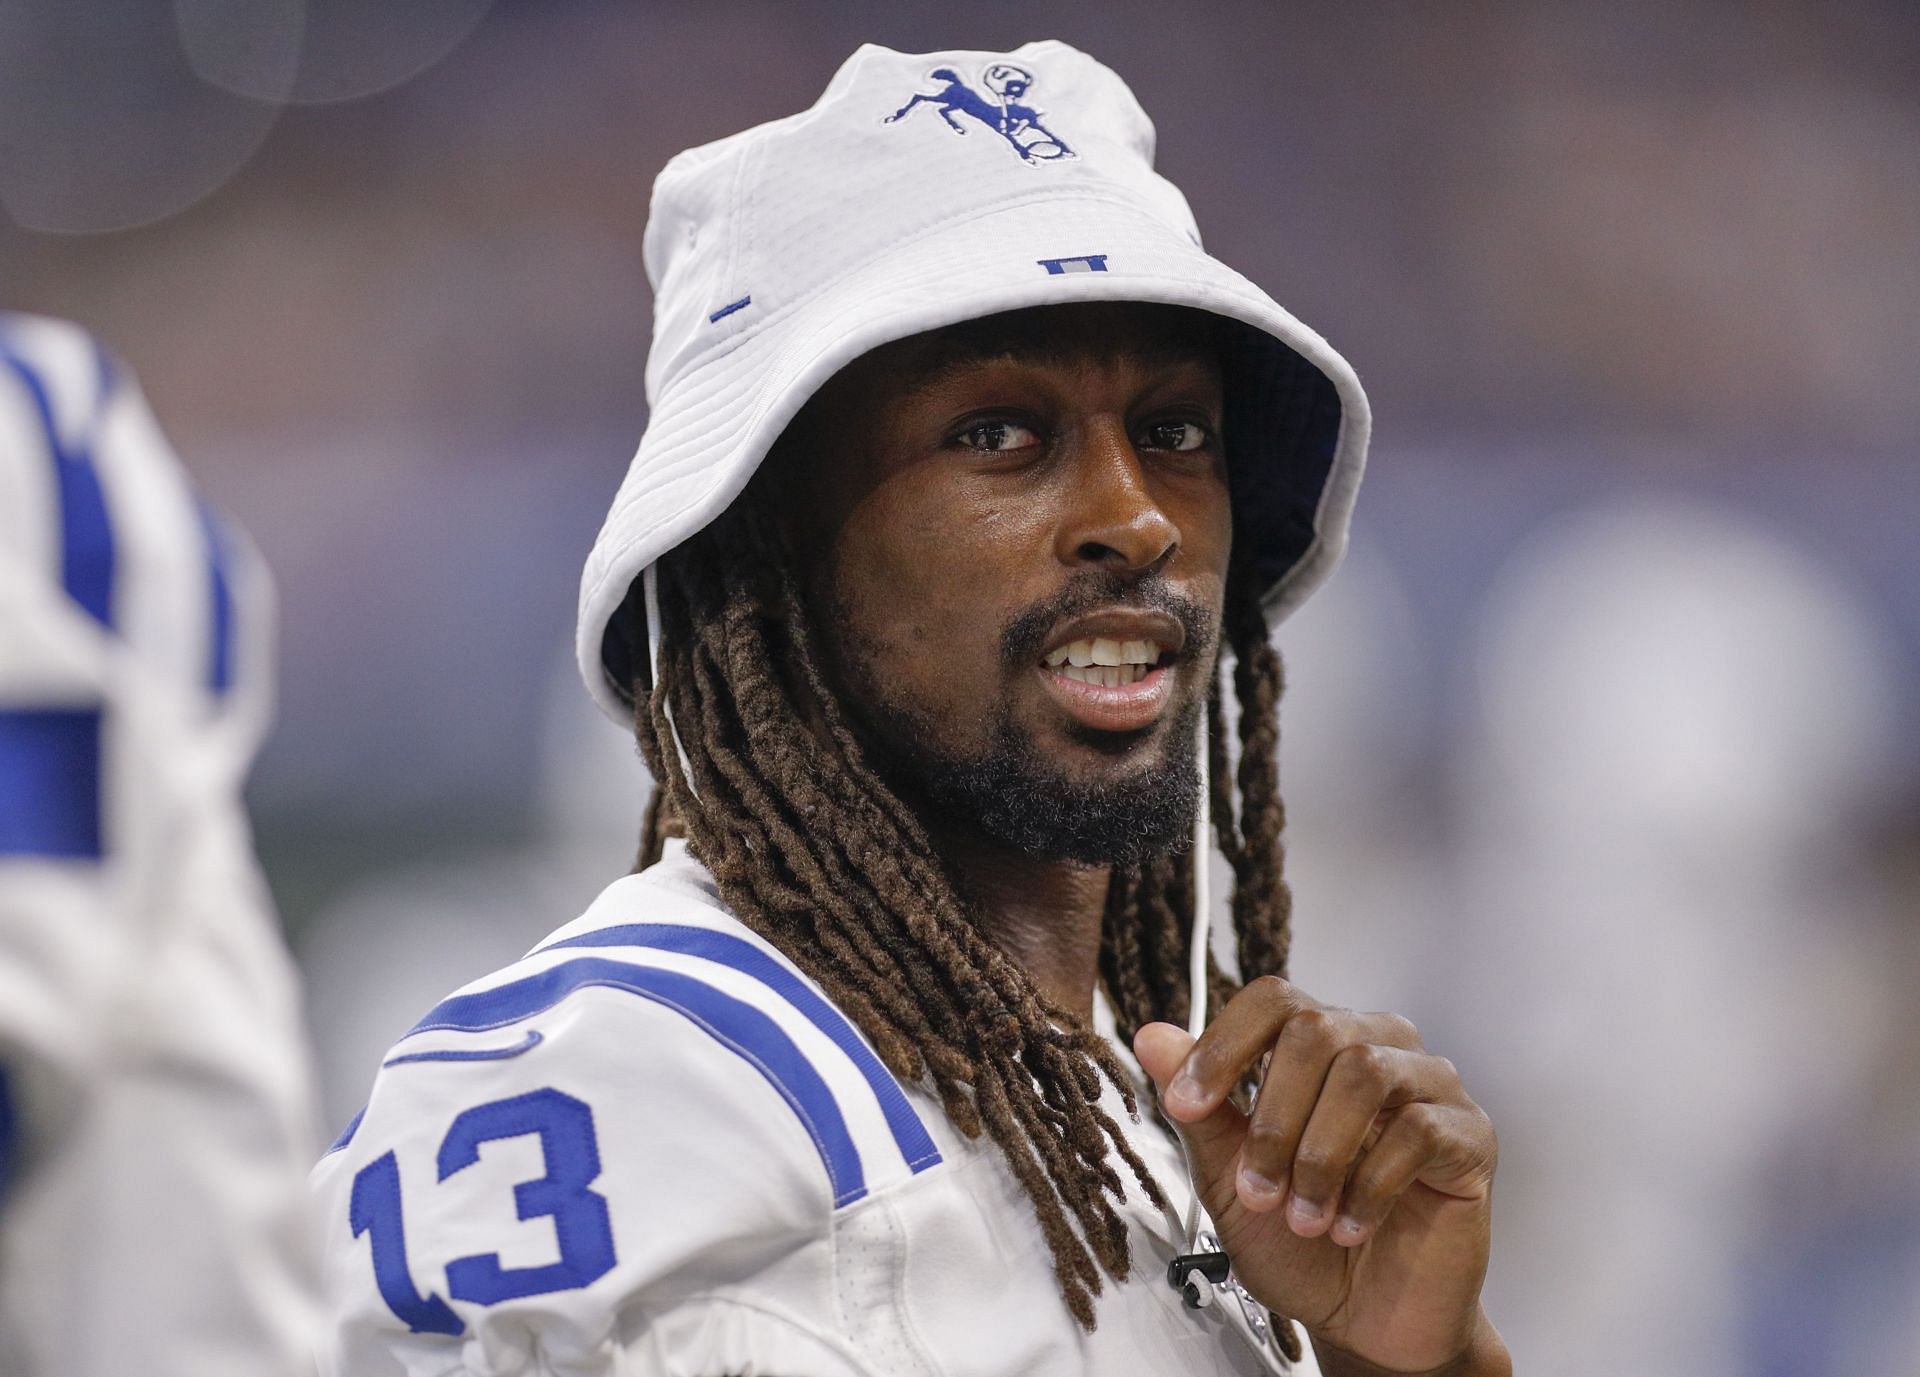 Wide receiver T.Y. Hilton, #13 of the Indianapolis Colts, is seen during the preseason game against the Cleveland Browns at Lucas Oil Stadium on August 17, 2019 in Indianapolis, Indiana.